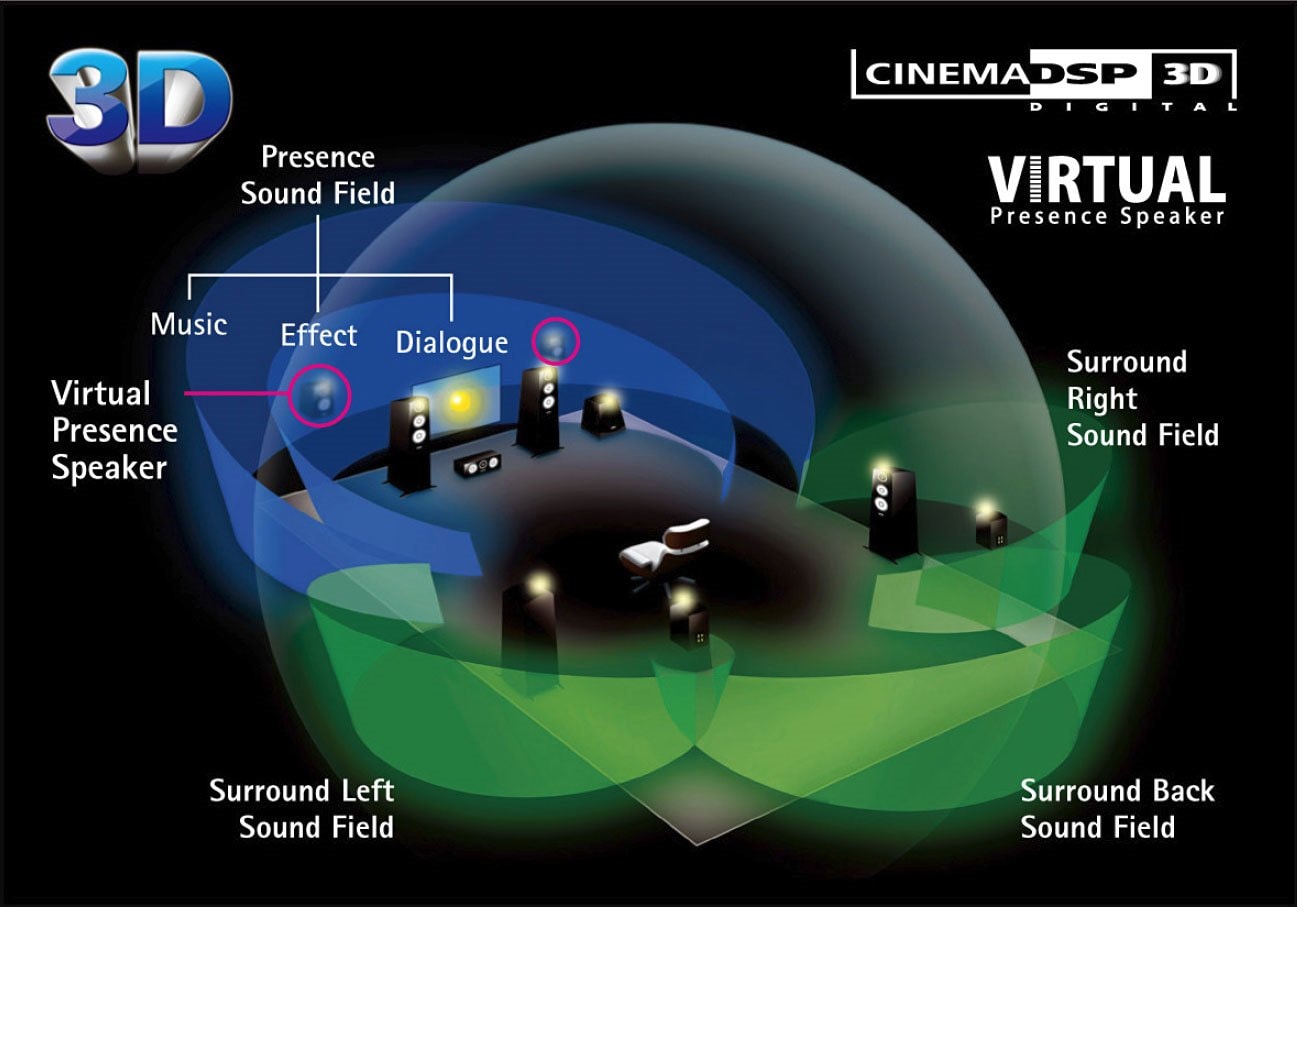 HD Audio with CINEMA DSP 3D and Virtual Presence Speaker